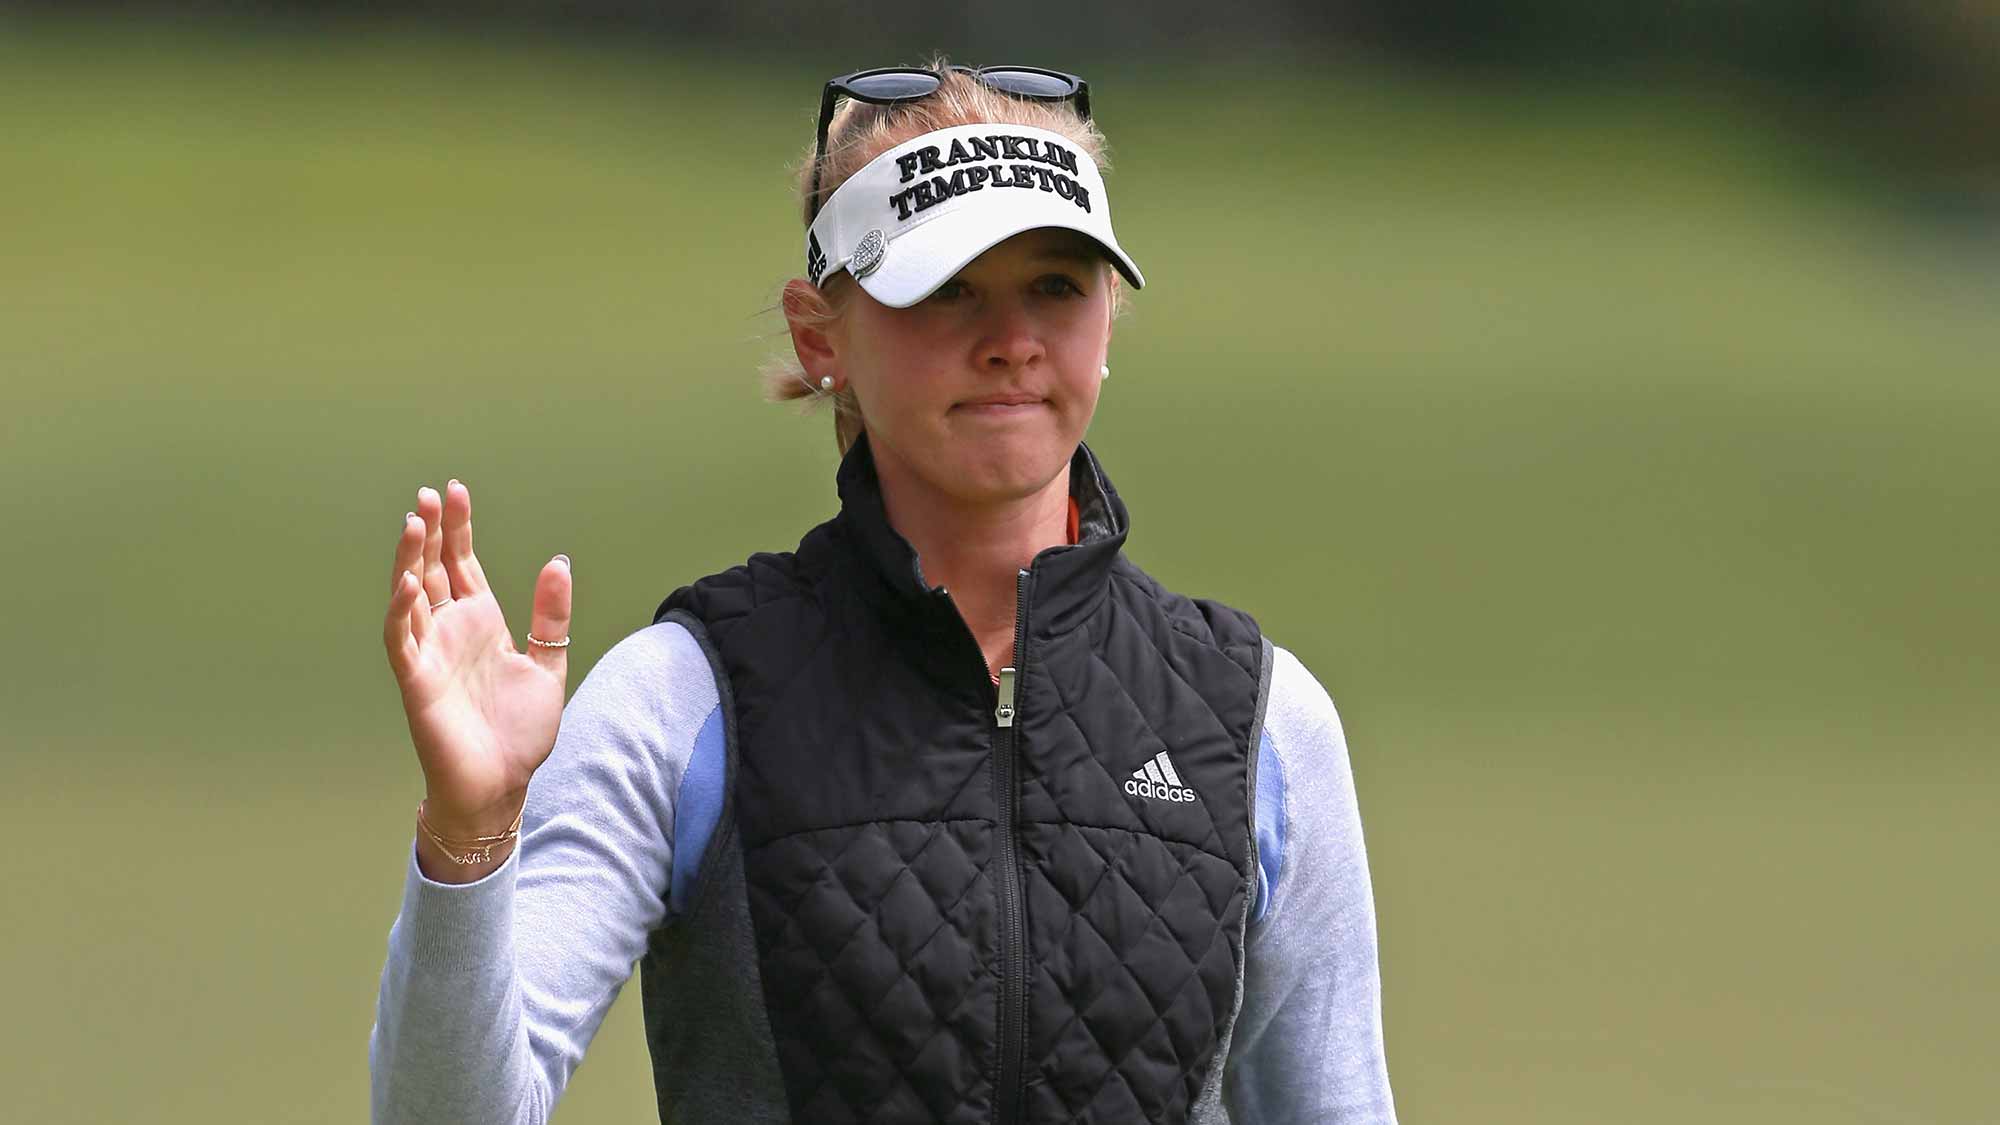 Jessica Korda waves to the gallery after making a birdie on the first hole during the third round of the LPGA MEDIHEAL Championship at Lake Merced Golf Club on April 28, 2018 in Daly City, California